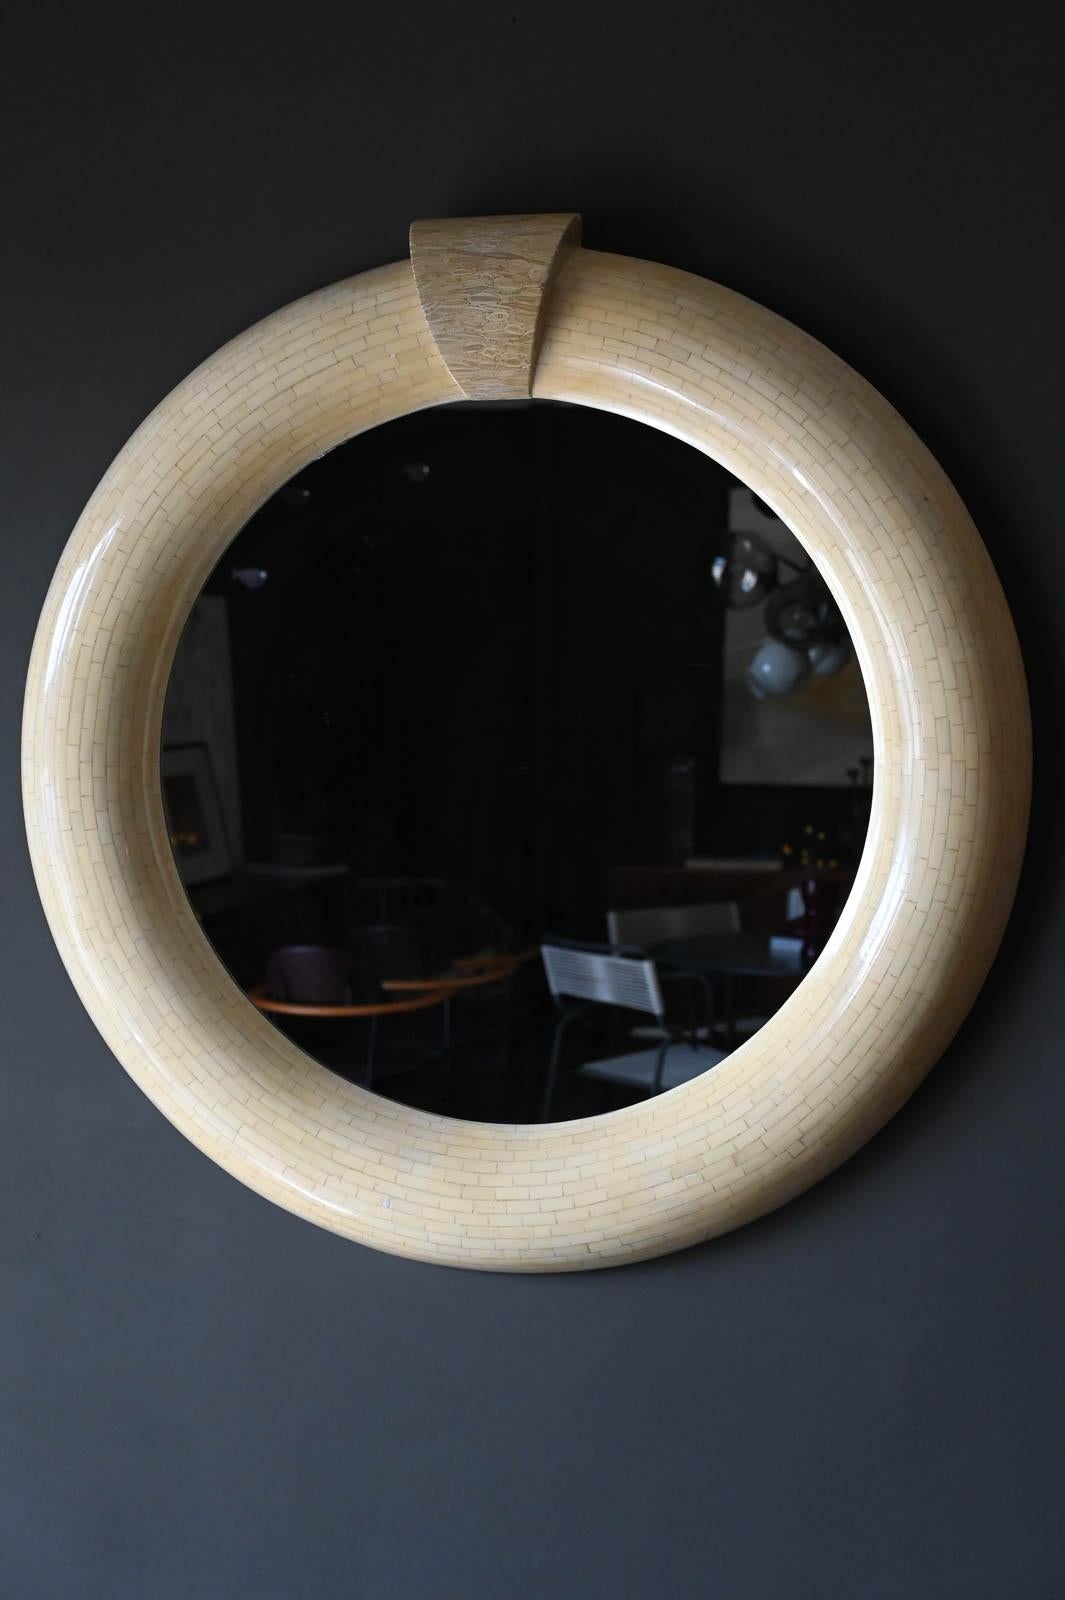 Enrique Garcel round tessellated bone mirror, circa. 1970. Beautiful tessellated bone with crown detail. Mirror is free of cracks or chips and frame is in excellent vintage condition. Signed on reverse.

Measures 48